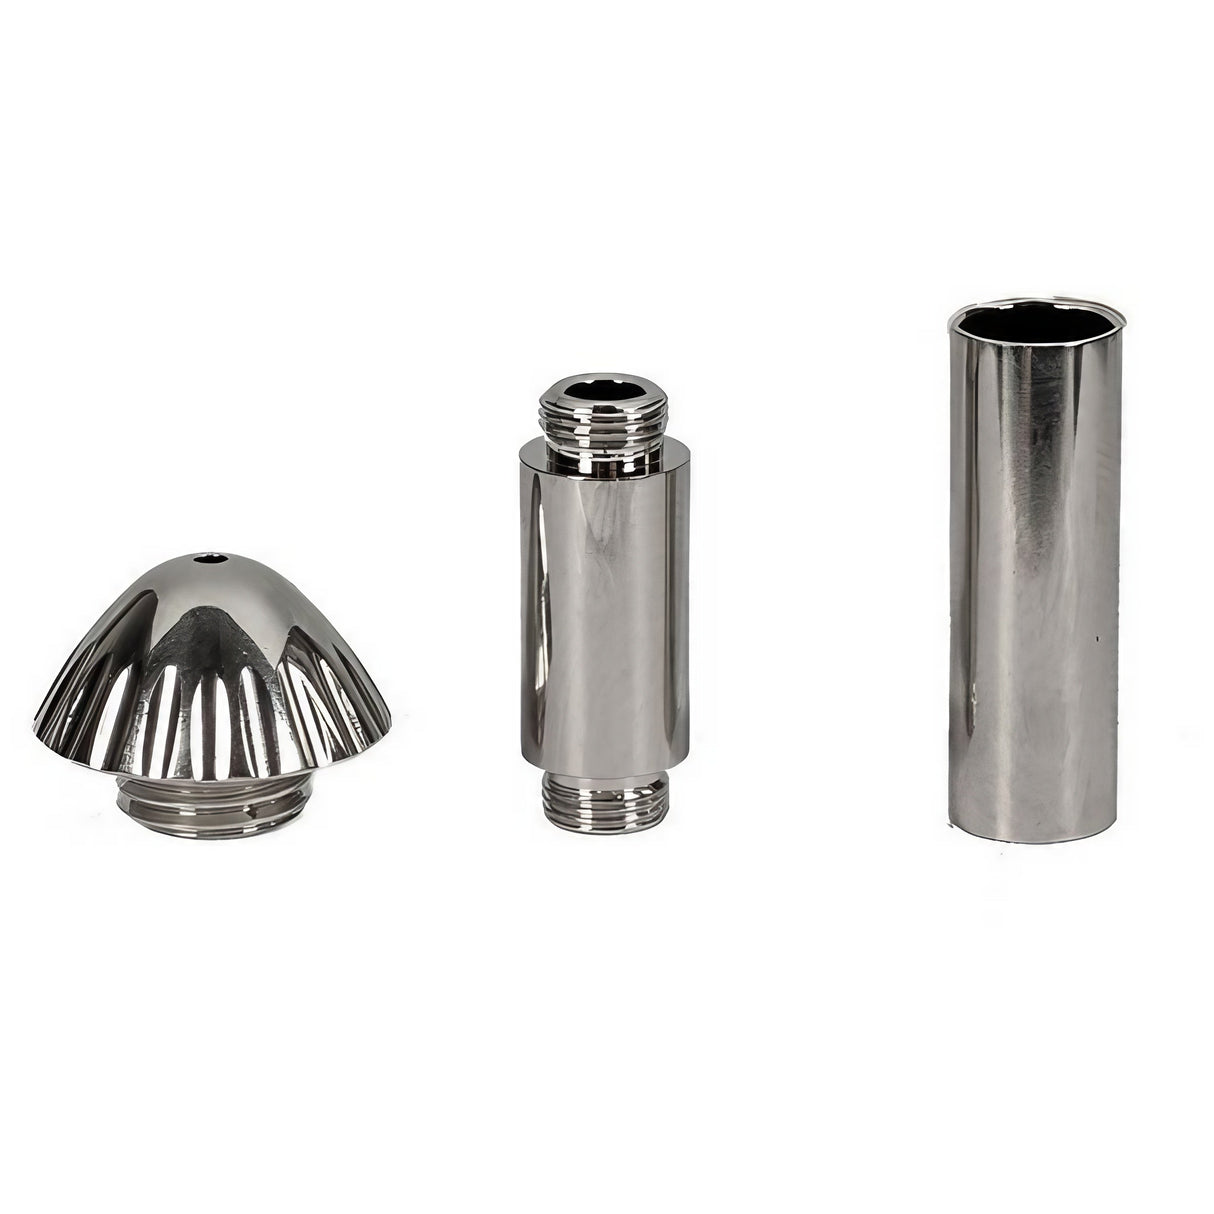 DankGeek Rocket Grinder & 1 Hitter set, front view, compact and portable, silver finish